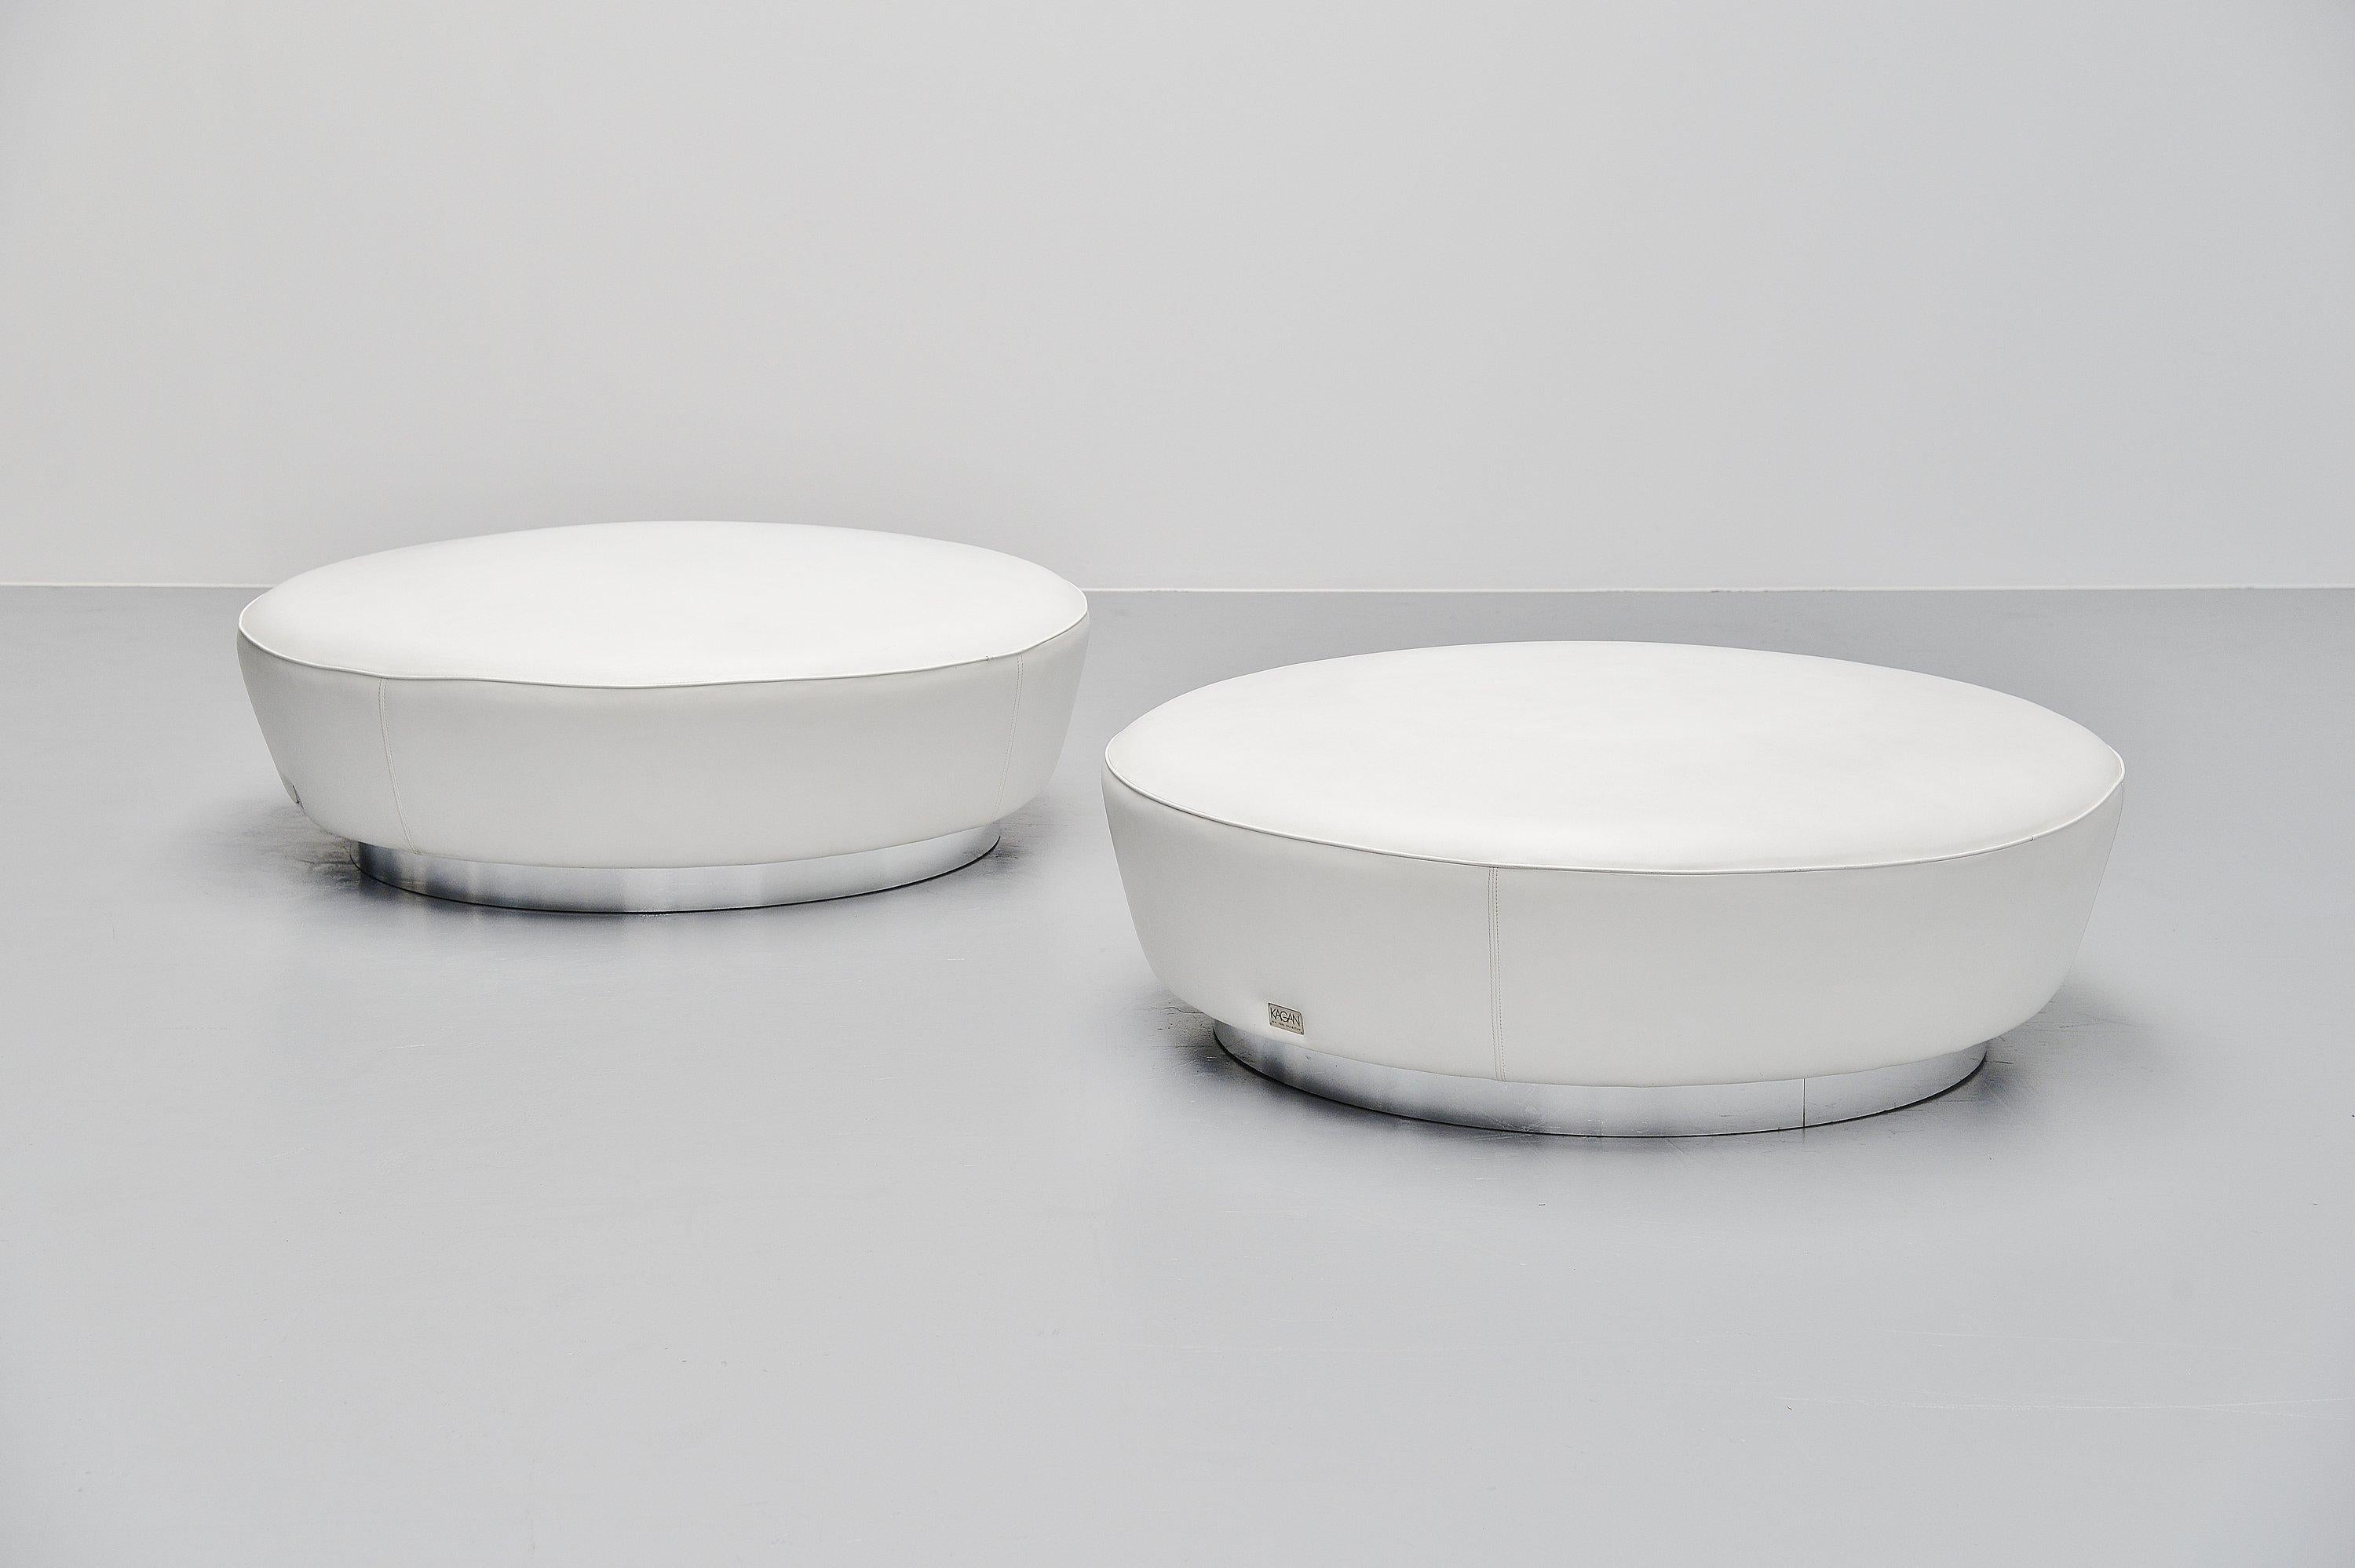 Super nice and large seating poufs designed by Vladimir Kagan and manufactured by Directional, United States, 1999. The stools have white leather upholstery and have a chrome ring at the bottom. These poofs are often sold with the serpentine sofa by